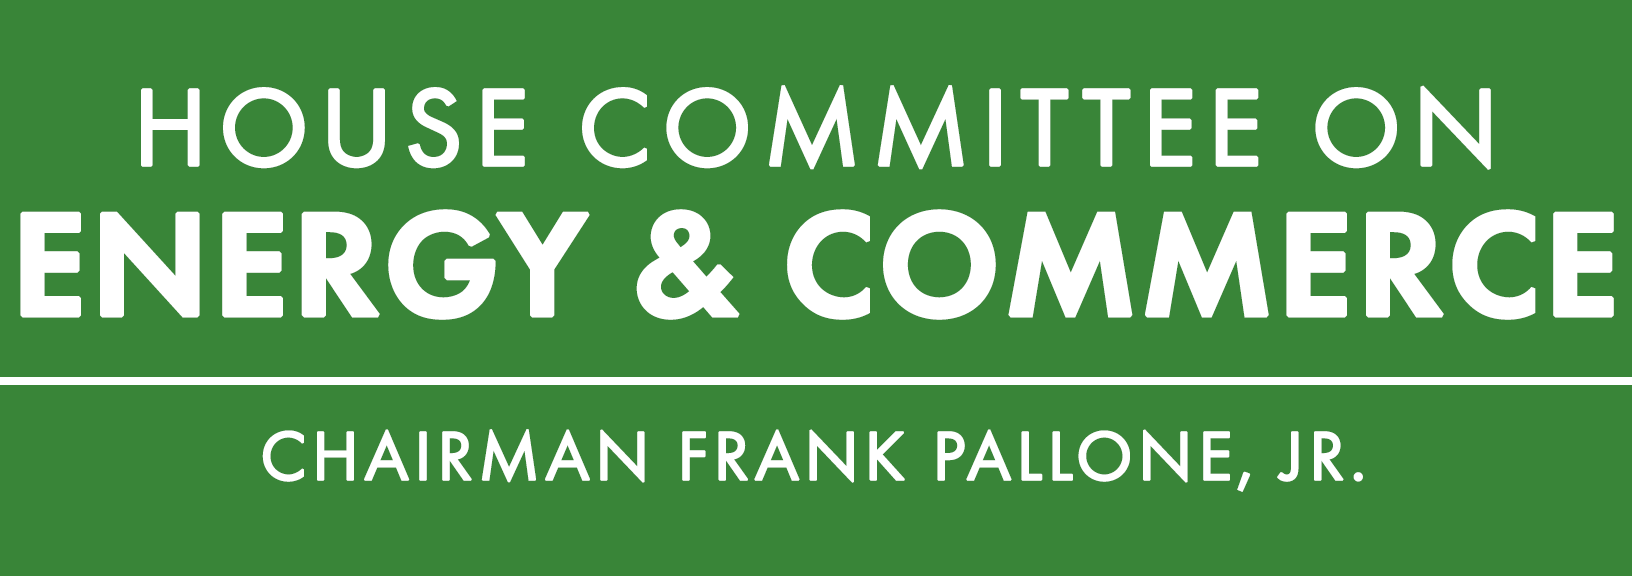 Energy and commerce committee logo